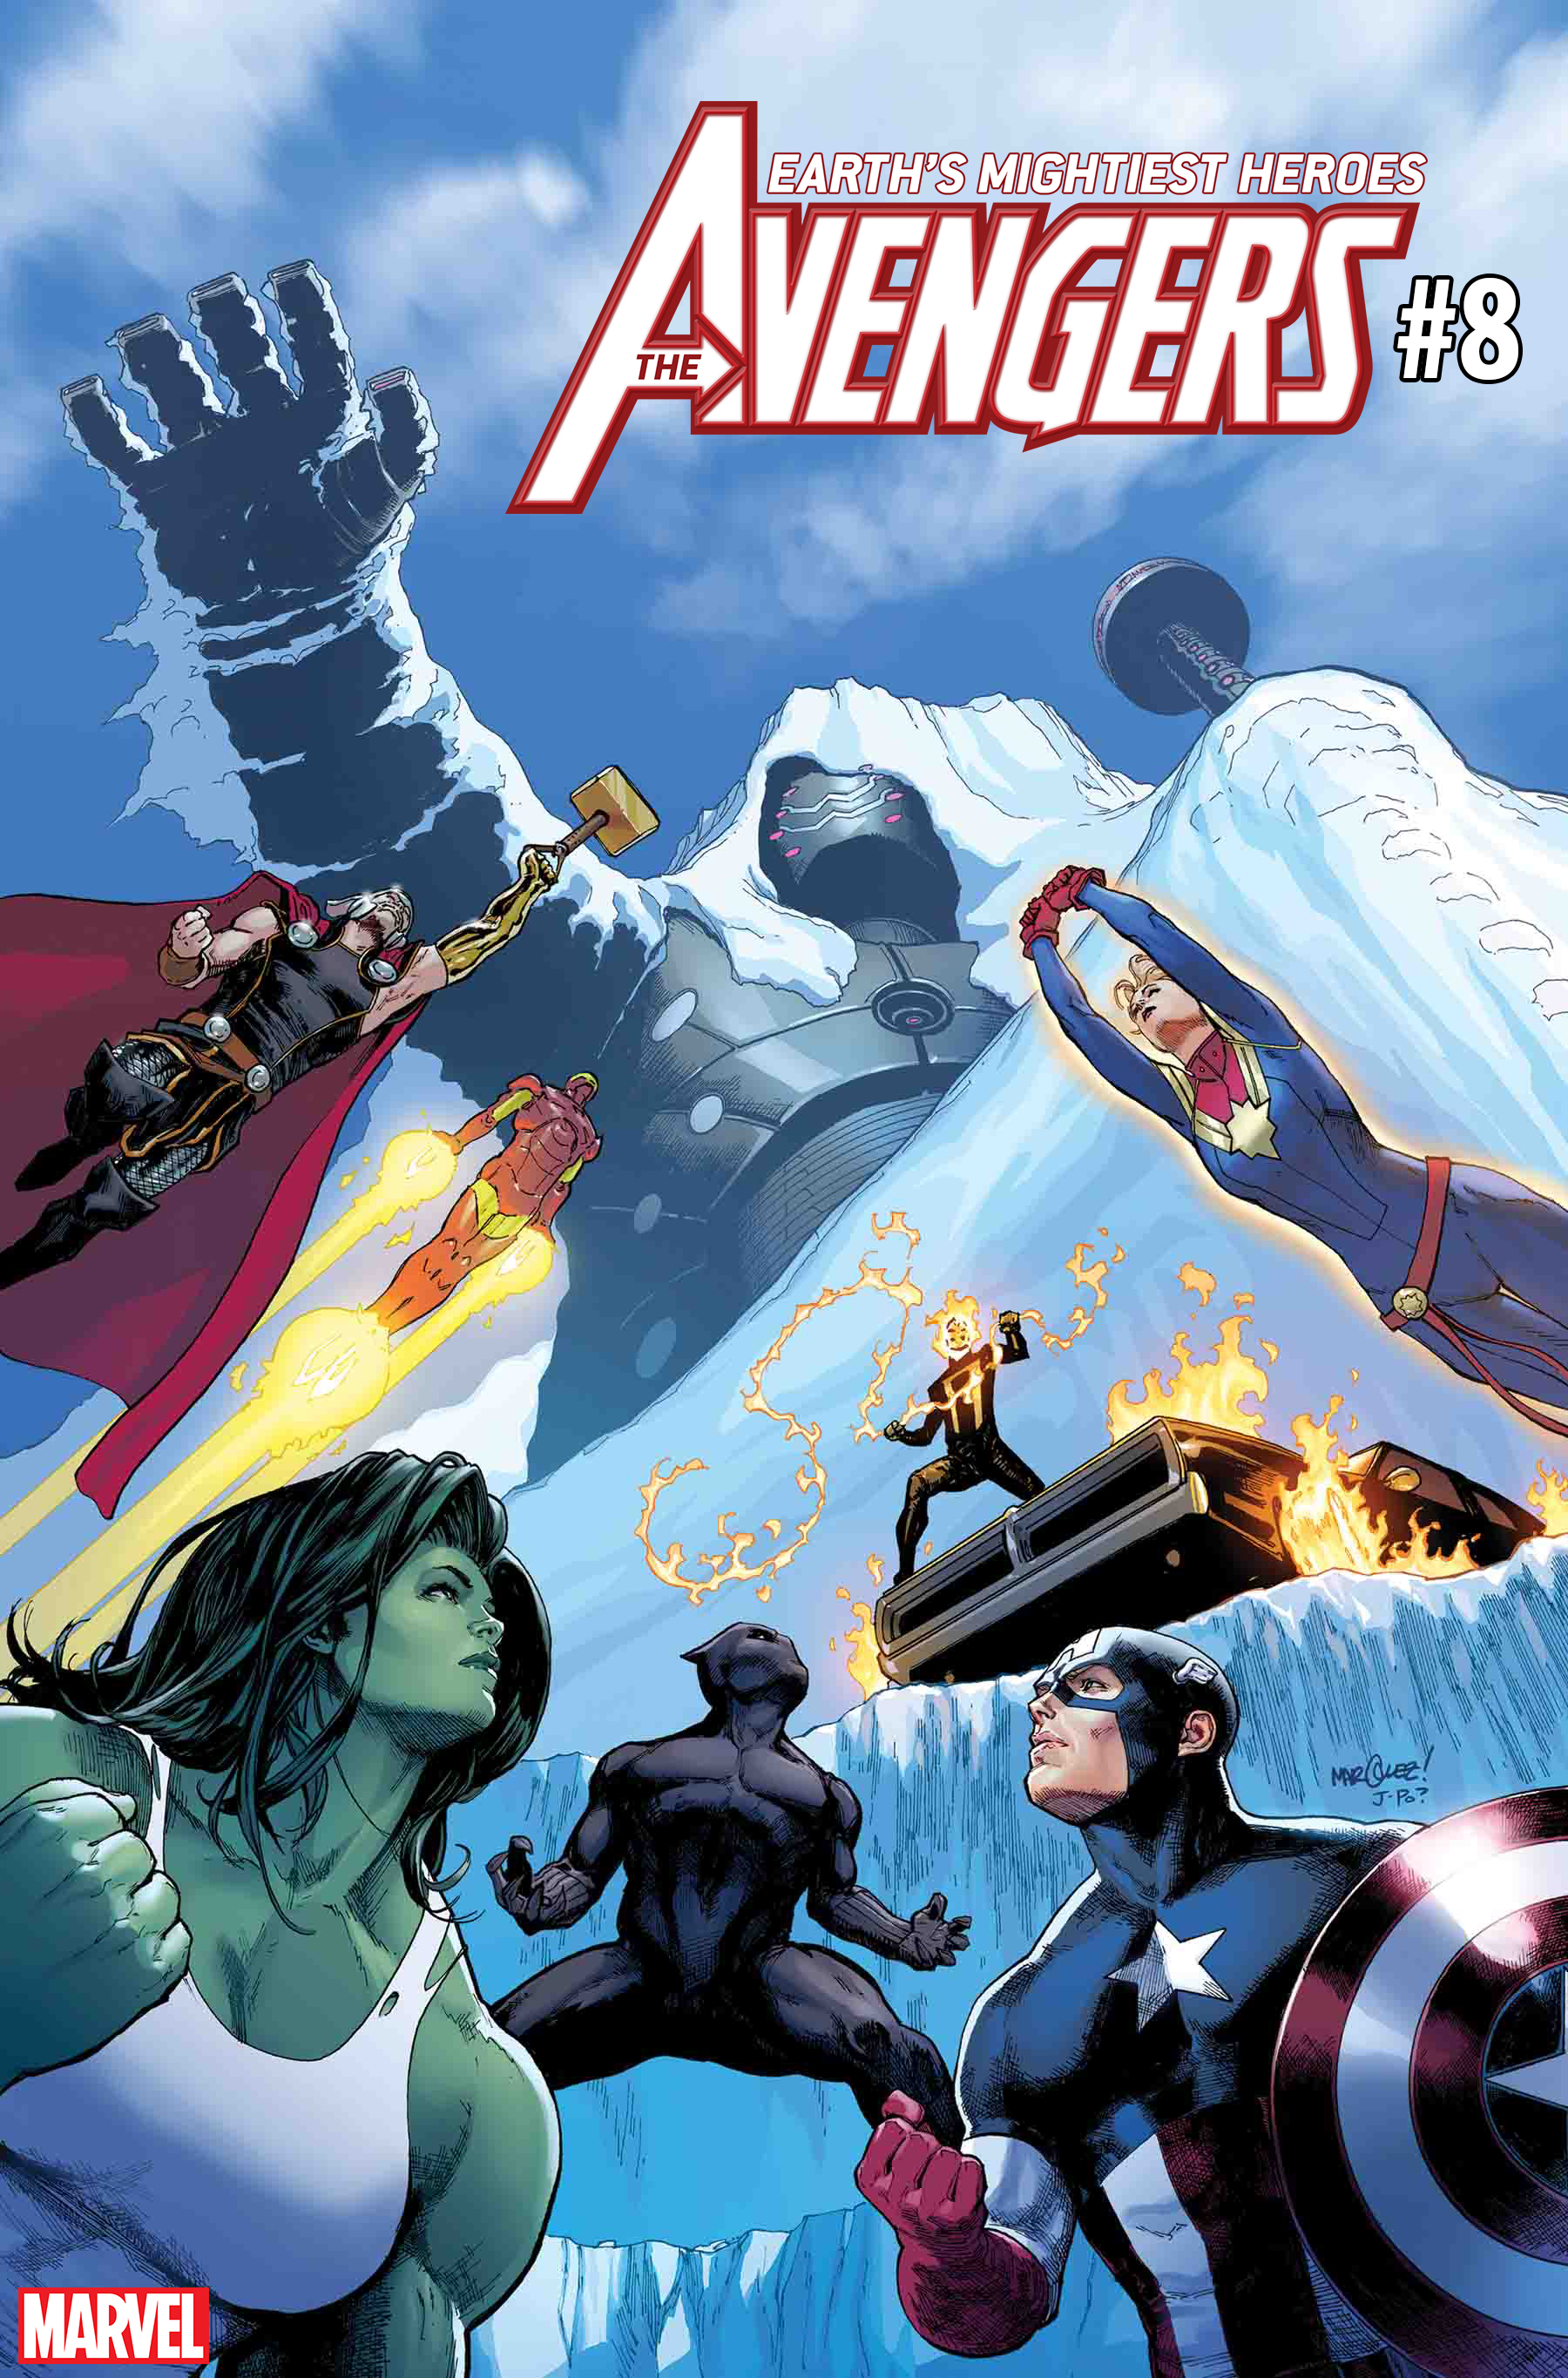 David Marquez joins the frigid Avengers #8 this summer